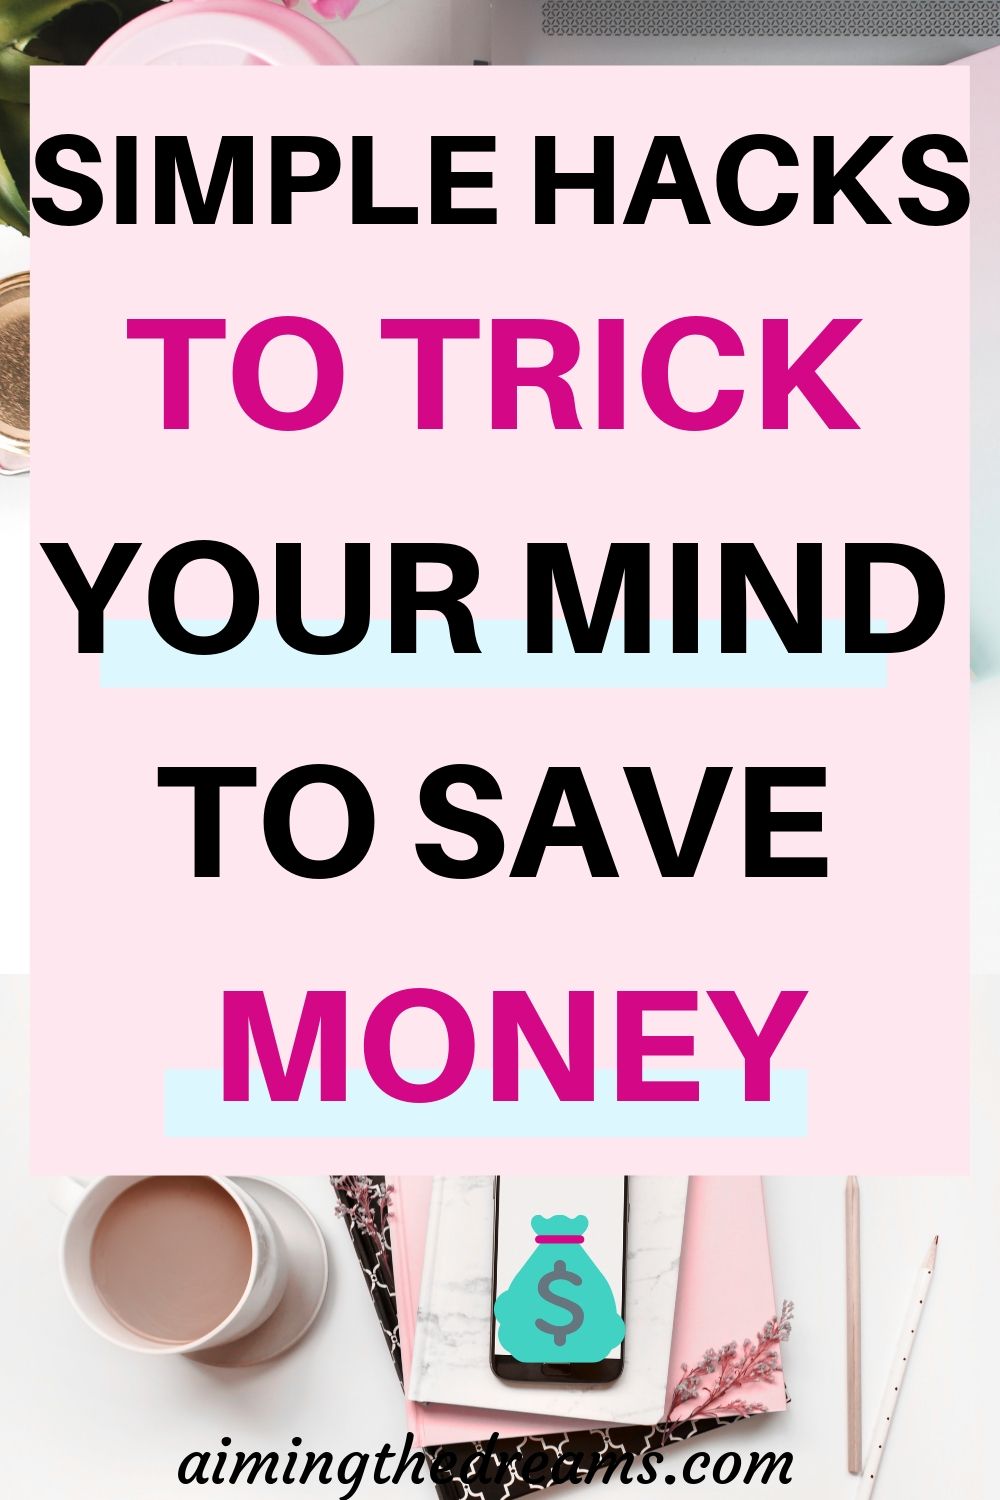 Simple hacks to trick yourself to save money